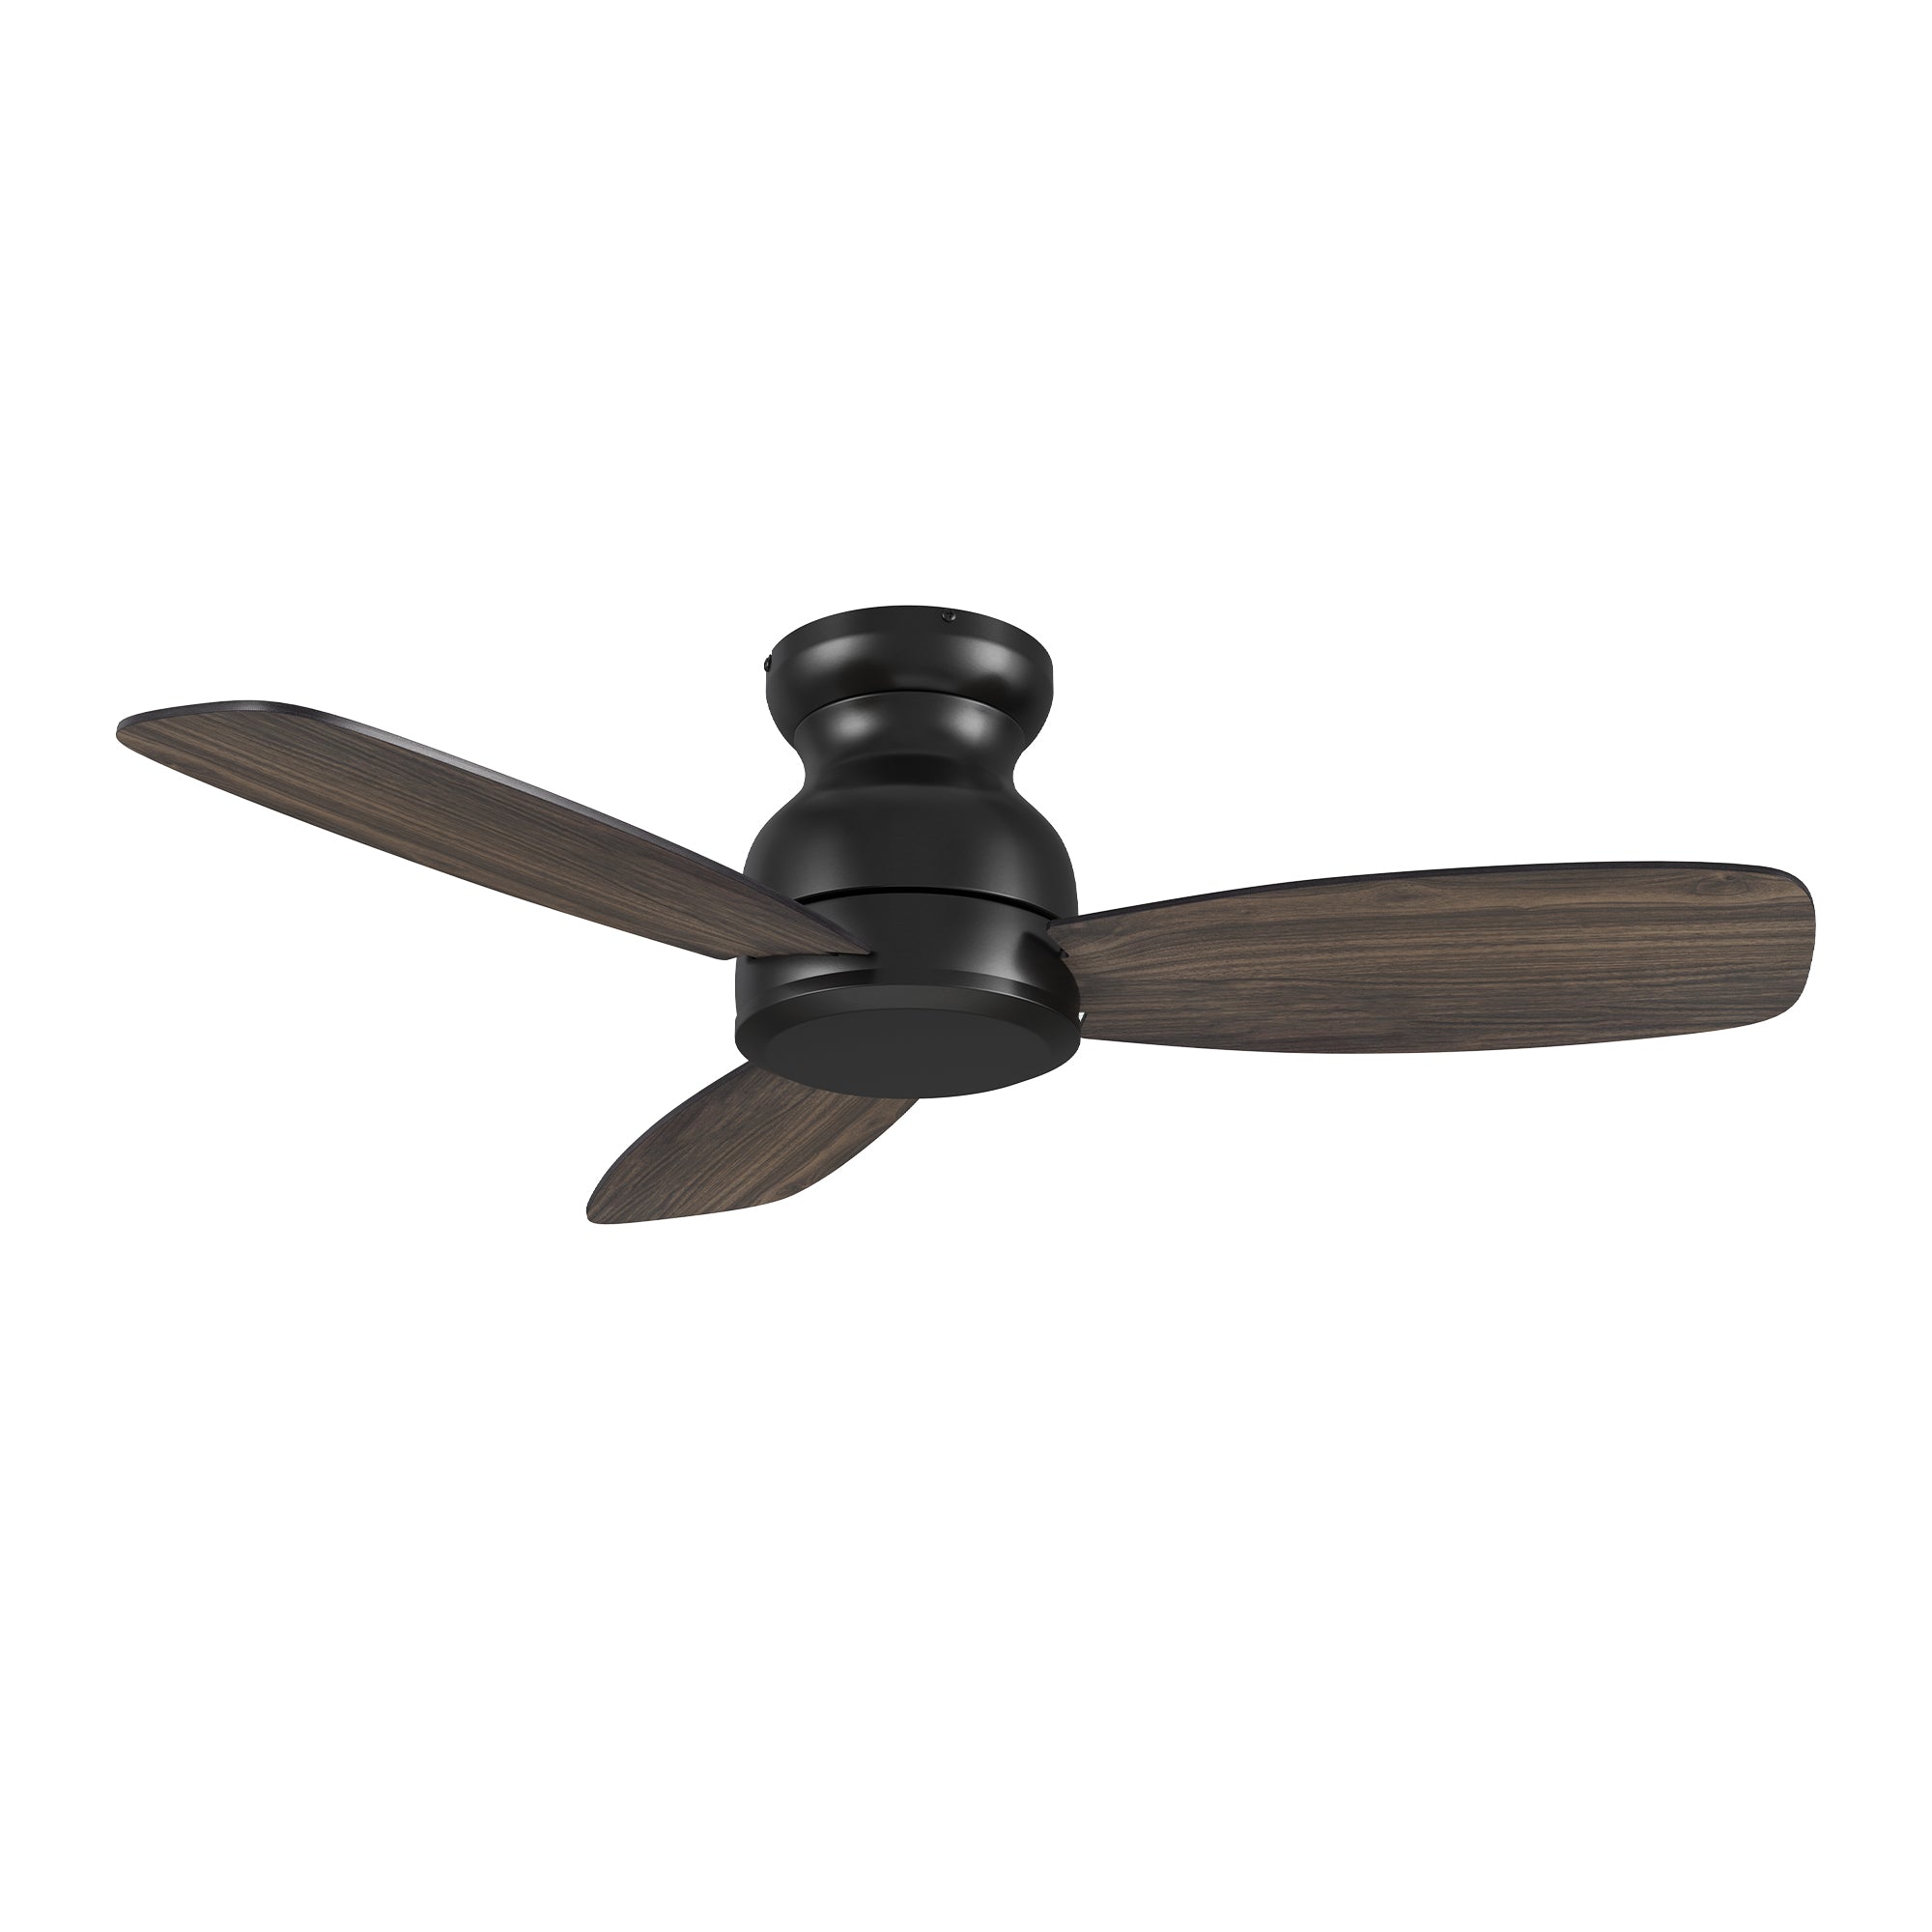 Enjoy a cooling breeze and relaxing controling in an elegant space with the Smafan Osborn 44 inch indoor ceiling fan. The fan is equipped with the latest motor and controling technology with a stylish exterior to suit the décor of your preference. The fan features a charming wood / white finish and sleek blades to cooling up your indoor living spaces. 